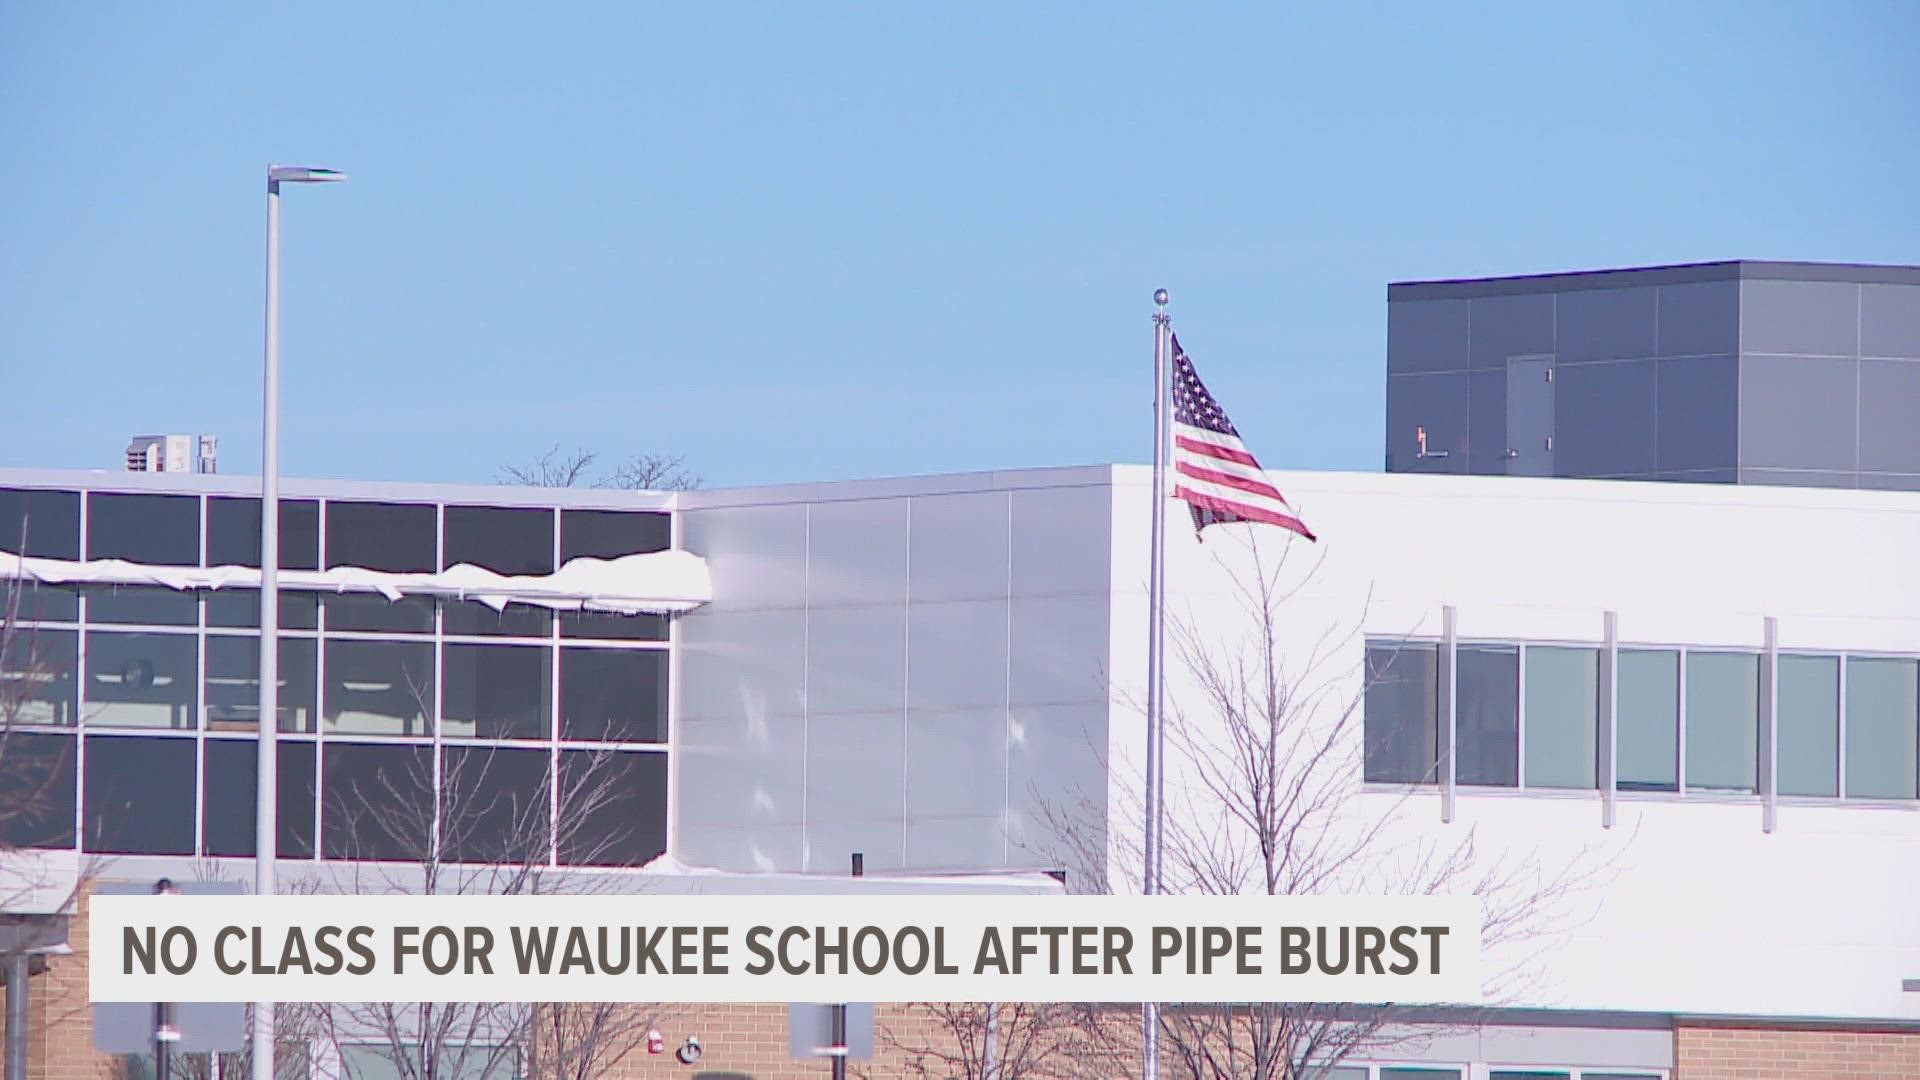 A water pipe broke overnight, according to the Waukee Community School District.